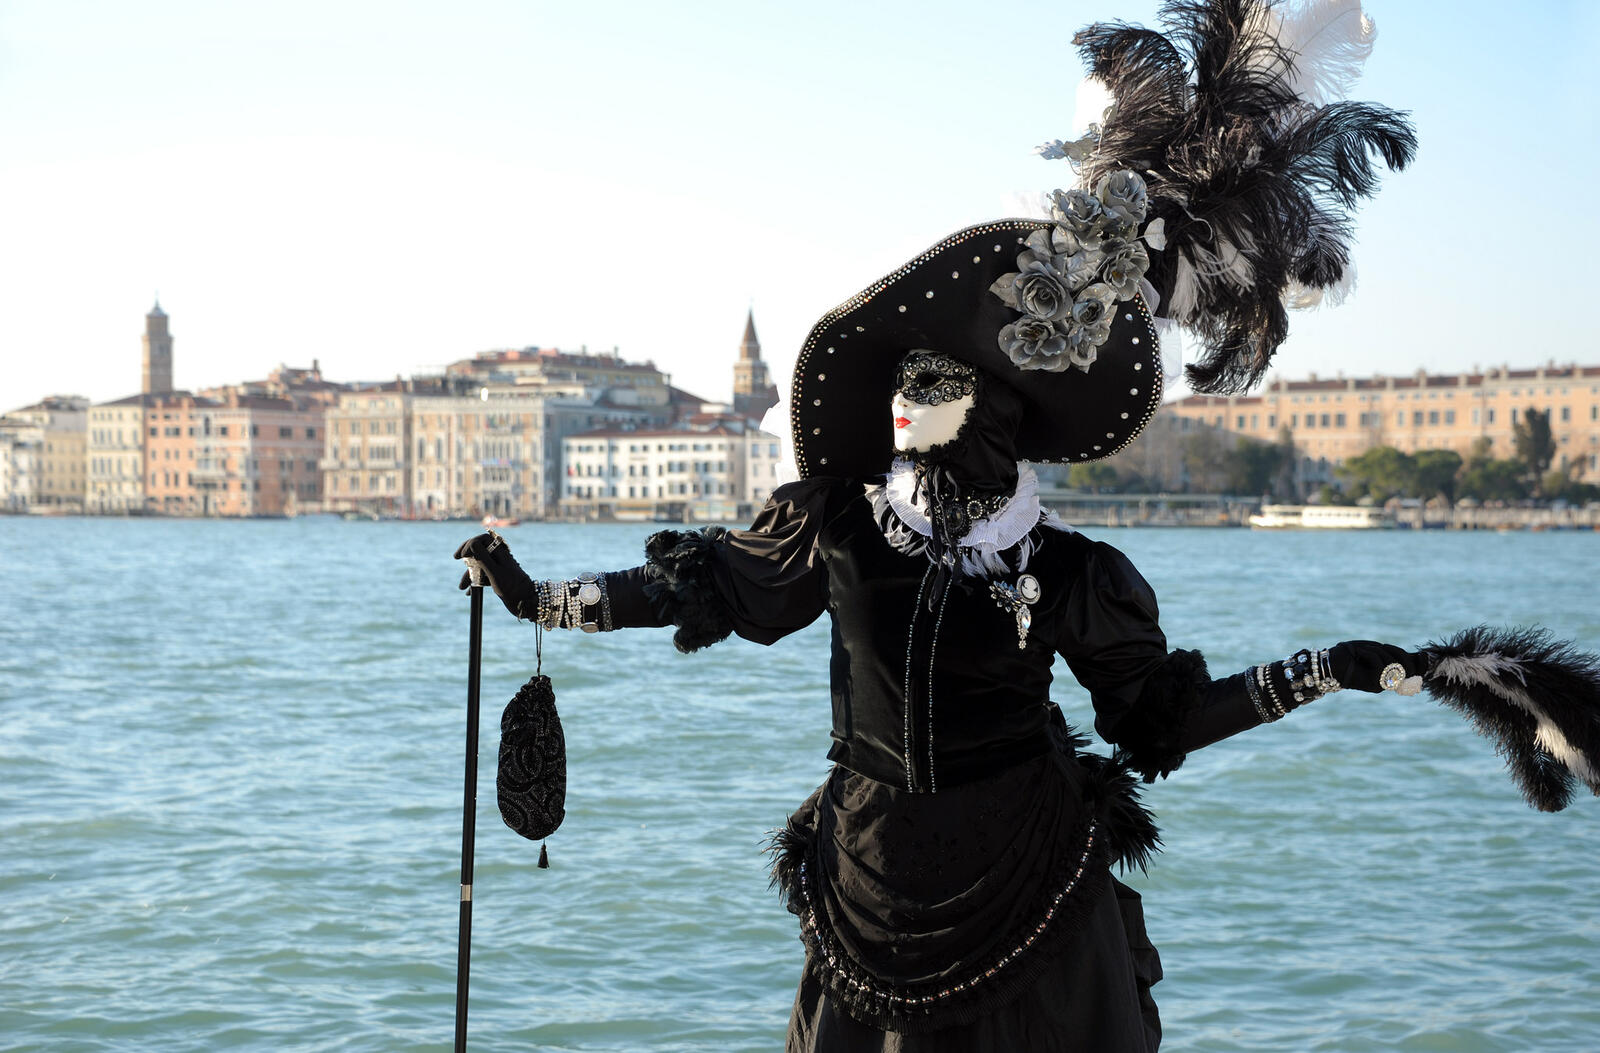 Wallpapers venice costumes carnival in venice on the desktop